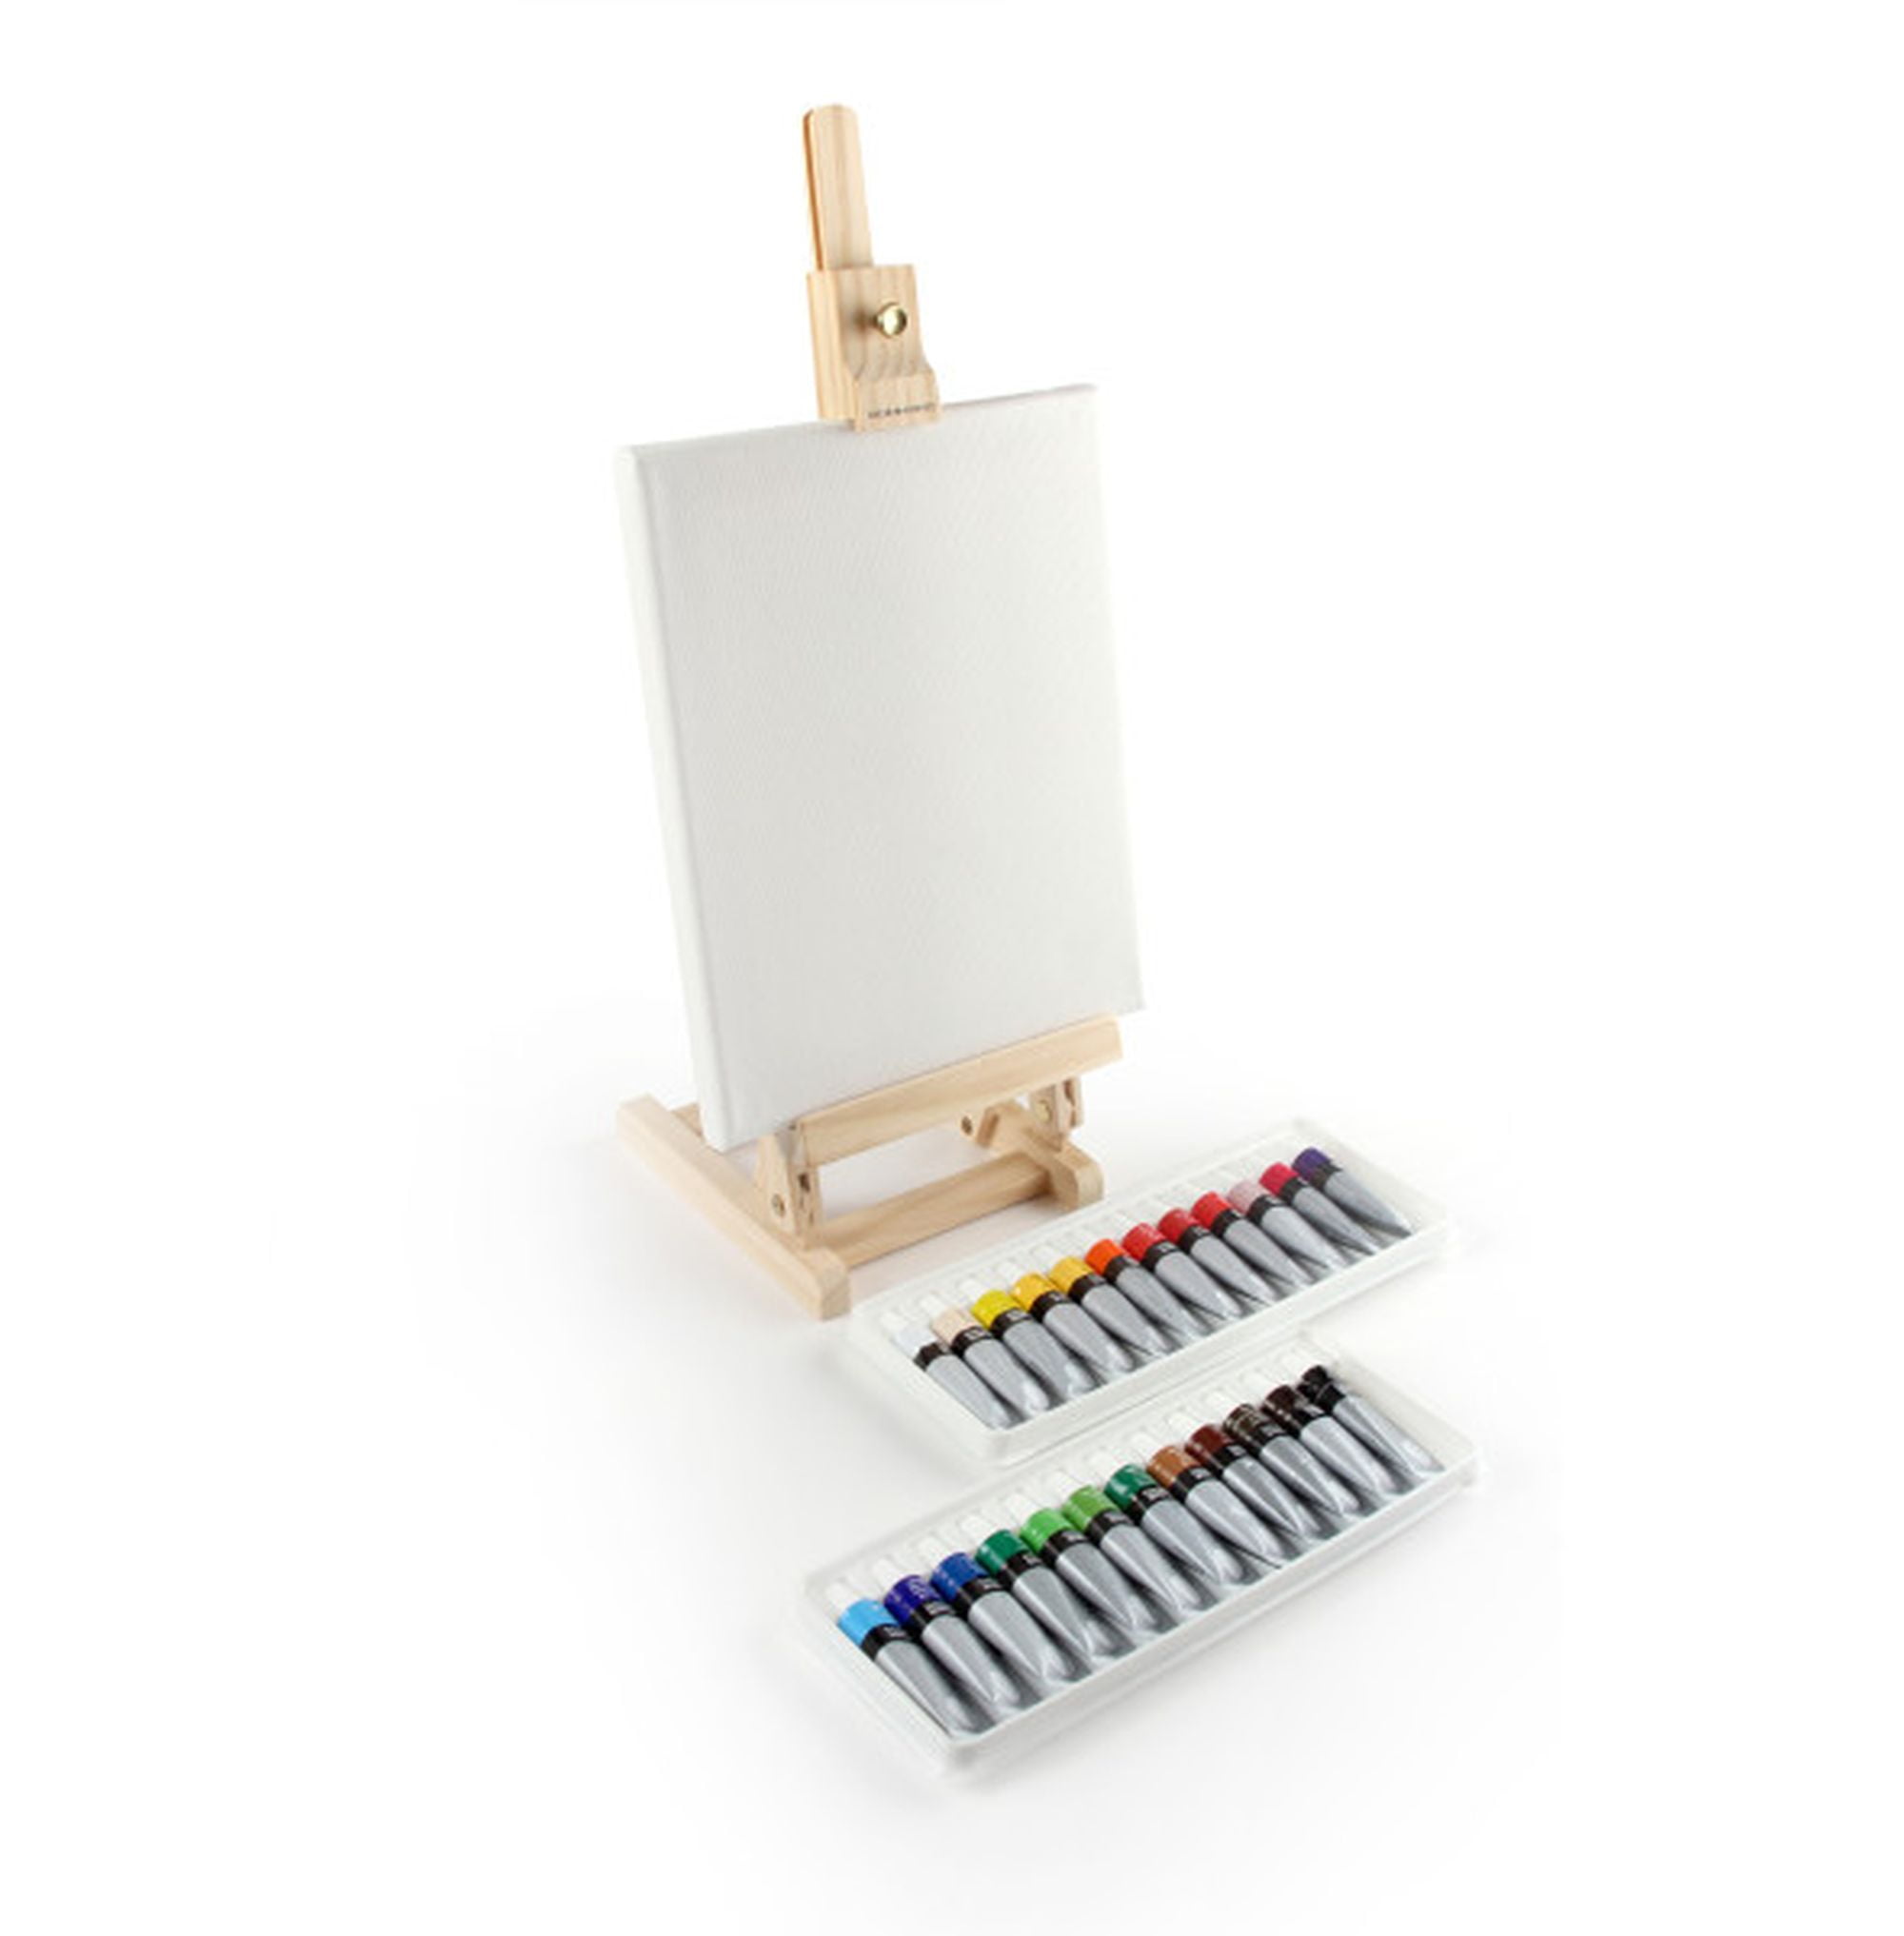 DALER AND ROWNEY Simply Complete Art Set & Full Size Easel Wood